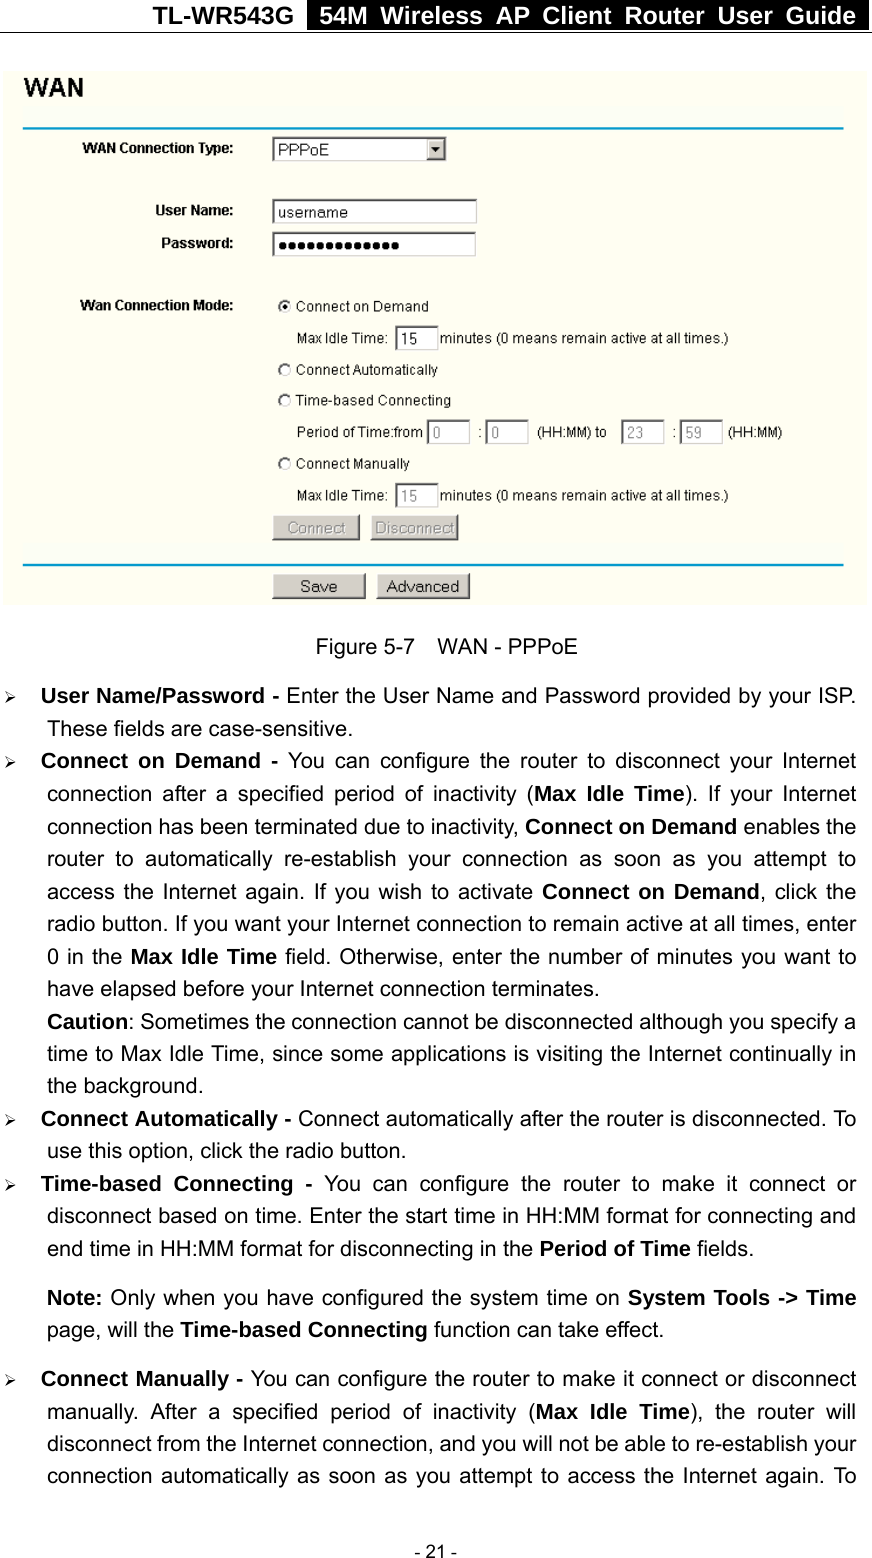 TL-WR543G   54M Wireless AP Client Router User Guide   Figure 5-7    WAN - PPPoE ¾ User Name/Password - Enter the User Name and Password provided by your ISP. These fields are case-sensitive. ¾ Connect on Demand - You can configure the router to disconnect your Internet connection after a specified period of inactivity (Max Idle Time). If your Internet connection has been terminated due to inactivity, Connect on Demand enables the router to automatically re-establish your connection as soon as you attempt to access the Internet again. If you wish to activate Connect on Demand, click the radio button. If you want your Internet connection to remain active at all times, enter 0 in the Max Idle Time field. Otherwise, enter the number of minutes you want to have elapsed before your Internet connection terminates. Caution: Sometimes the connection cannot be disconnected although you specify a time to Max Idle Time, since some applications is visiting the Internet continually in the background. ¾ Connect Automatically - Connect automatically after the router is disconnected. To use this option, click the radio button. ¾ Time-based Connecting - You can configure the router to make it connect or disconnect based on time. Enter the start time in HH:MM format for connecting and end time in HH:MM format for disconnecting in the Period of Time fields.   Note: Only when you have configured the system time on System Tools -&gt; Time page, will the Time-based Connecting function can take effect. ¾ Connect Manually - You can configure the router to make it connect or disconnect manually. After a specified period of inactivity (Max Idle Time), the router will disconnect from the Internet connection, and you will not be able to re-establish your connection automatically as soon as you attempt to access the Internet again. To  - 21 - 